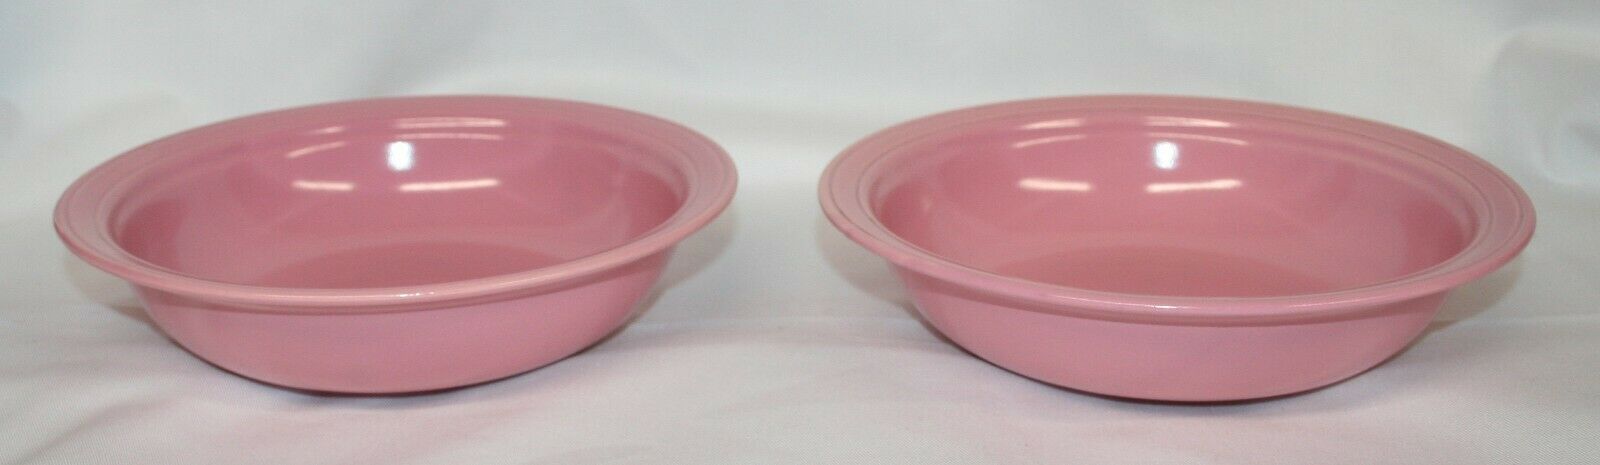 Coors Pottery Mello-Tone Pink 9